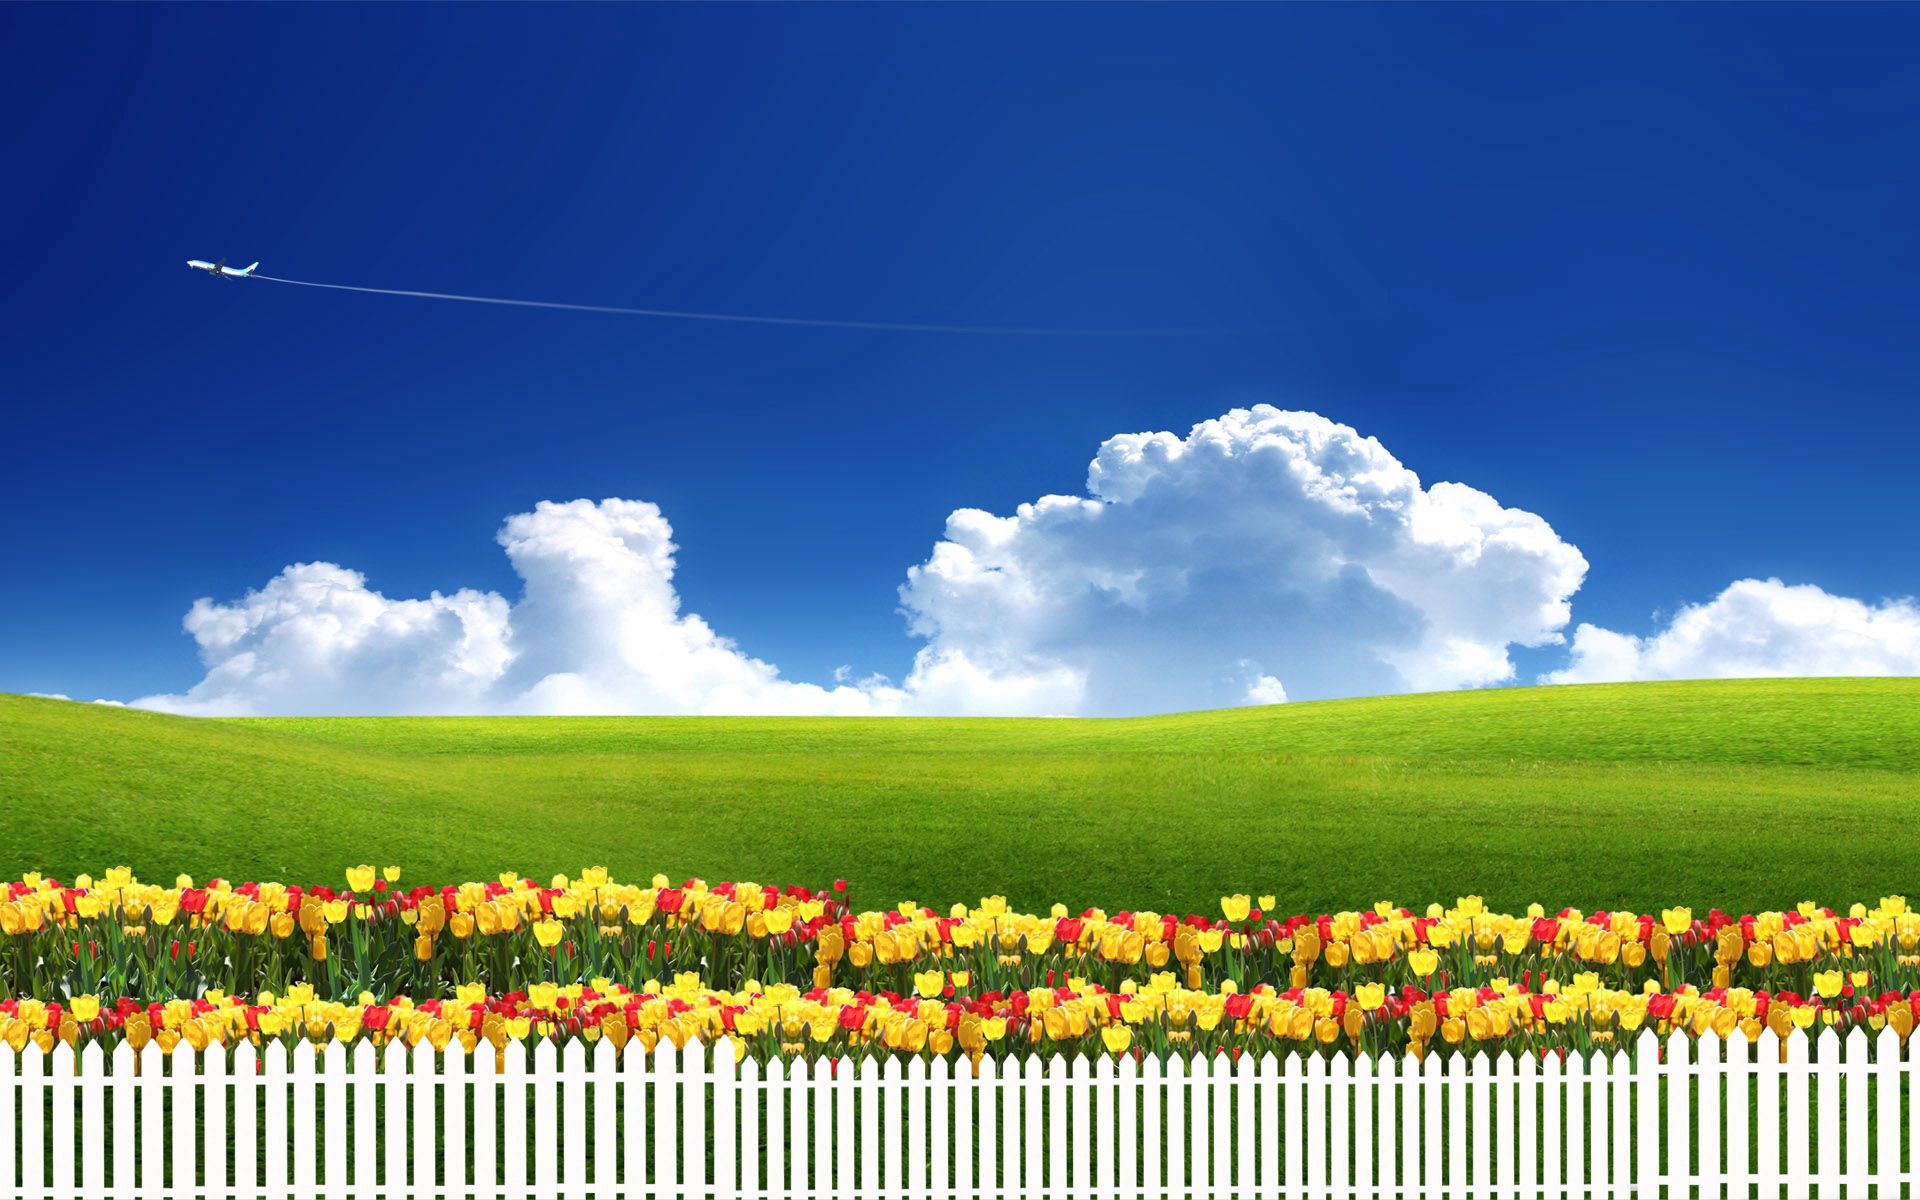 miscellanea, tulips, plane, clouds, miscellaneous, fence, airplane, serenity